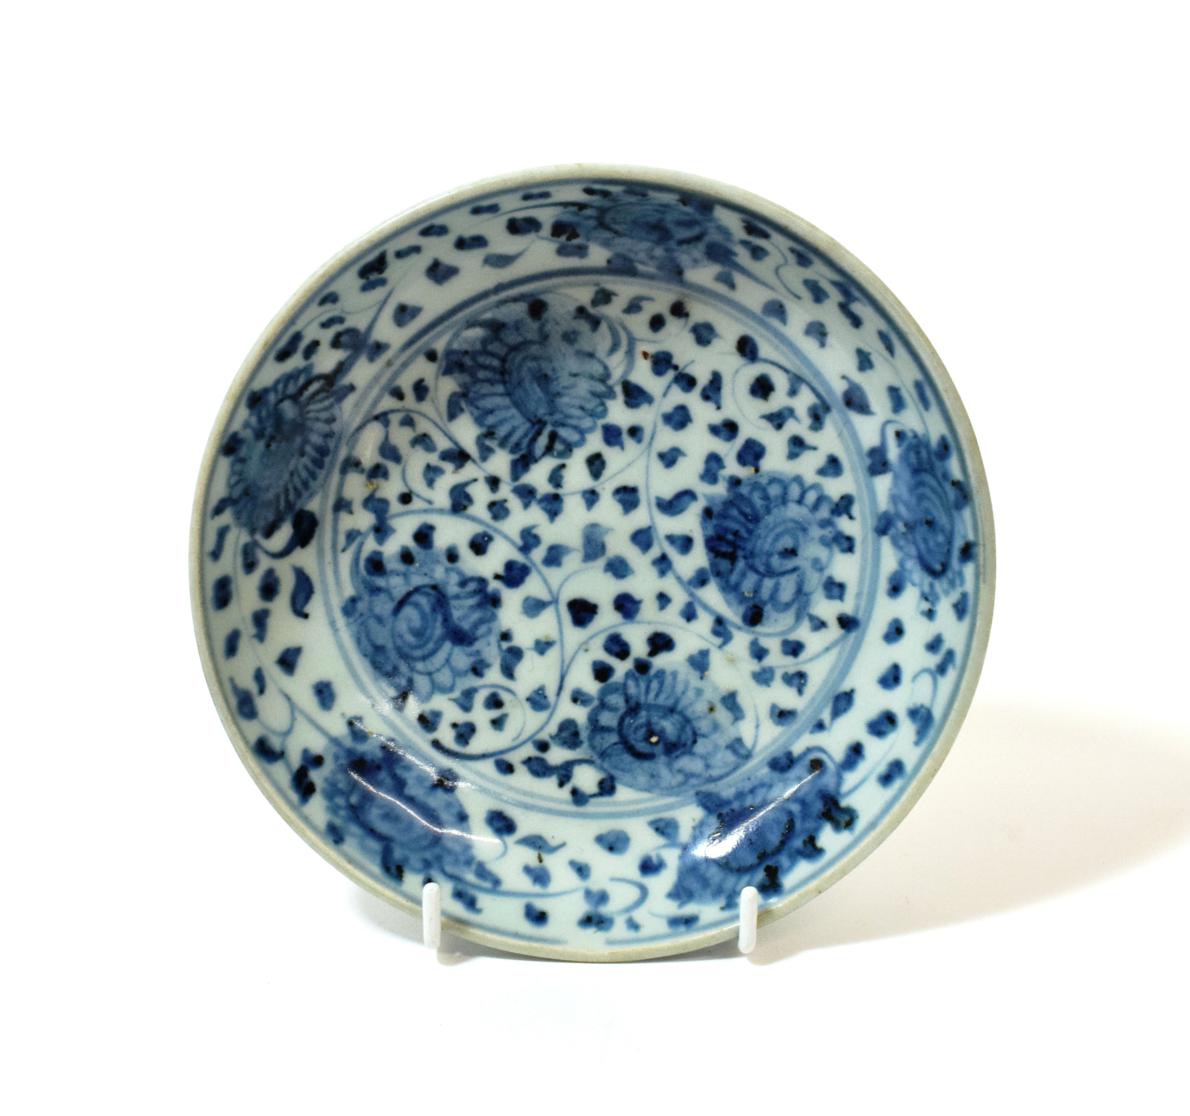 Lot 1089 - A Chinese Porcelain Saucer Dish, late Ming, 16th/17th century, painted in underglaze blue with...